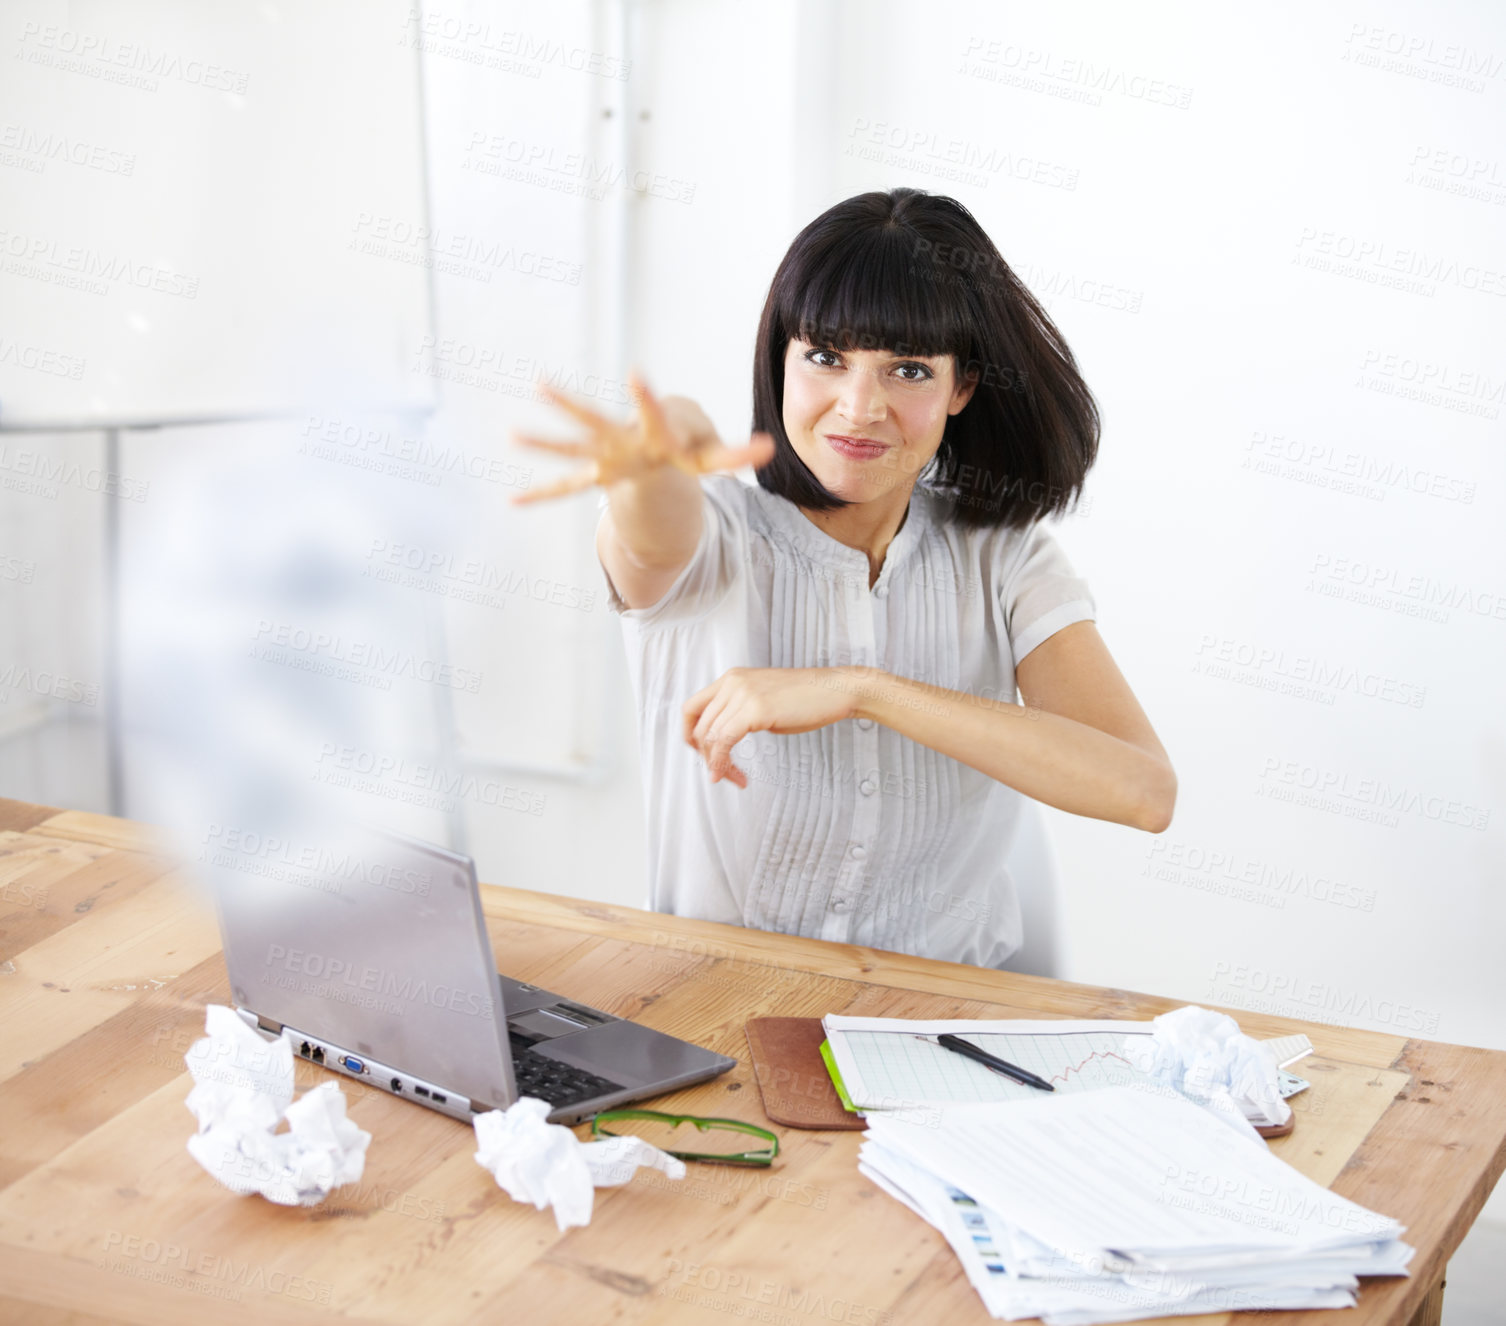 Buy stock photo Upset, throwing paper and portrait of business woman at her desk with burnout, anger or stress. Frustrated female worker with finance documents or angry about accounting problem or crisis at laptop